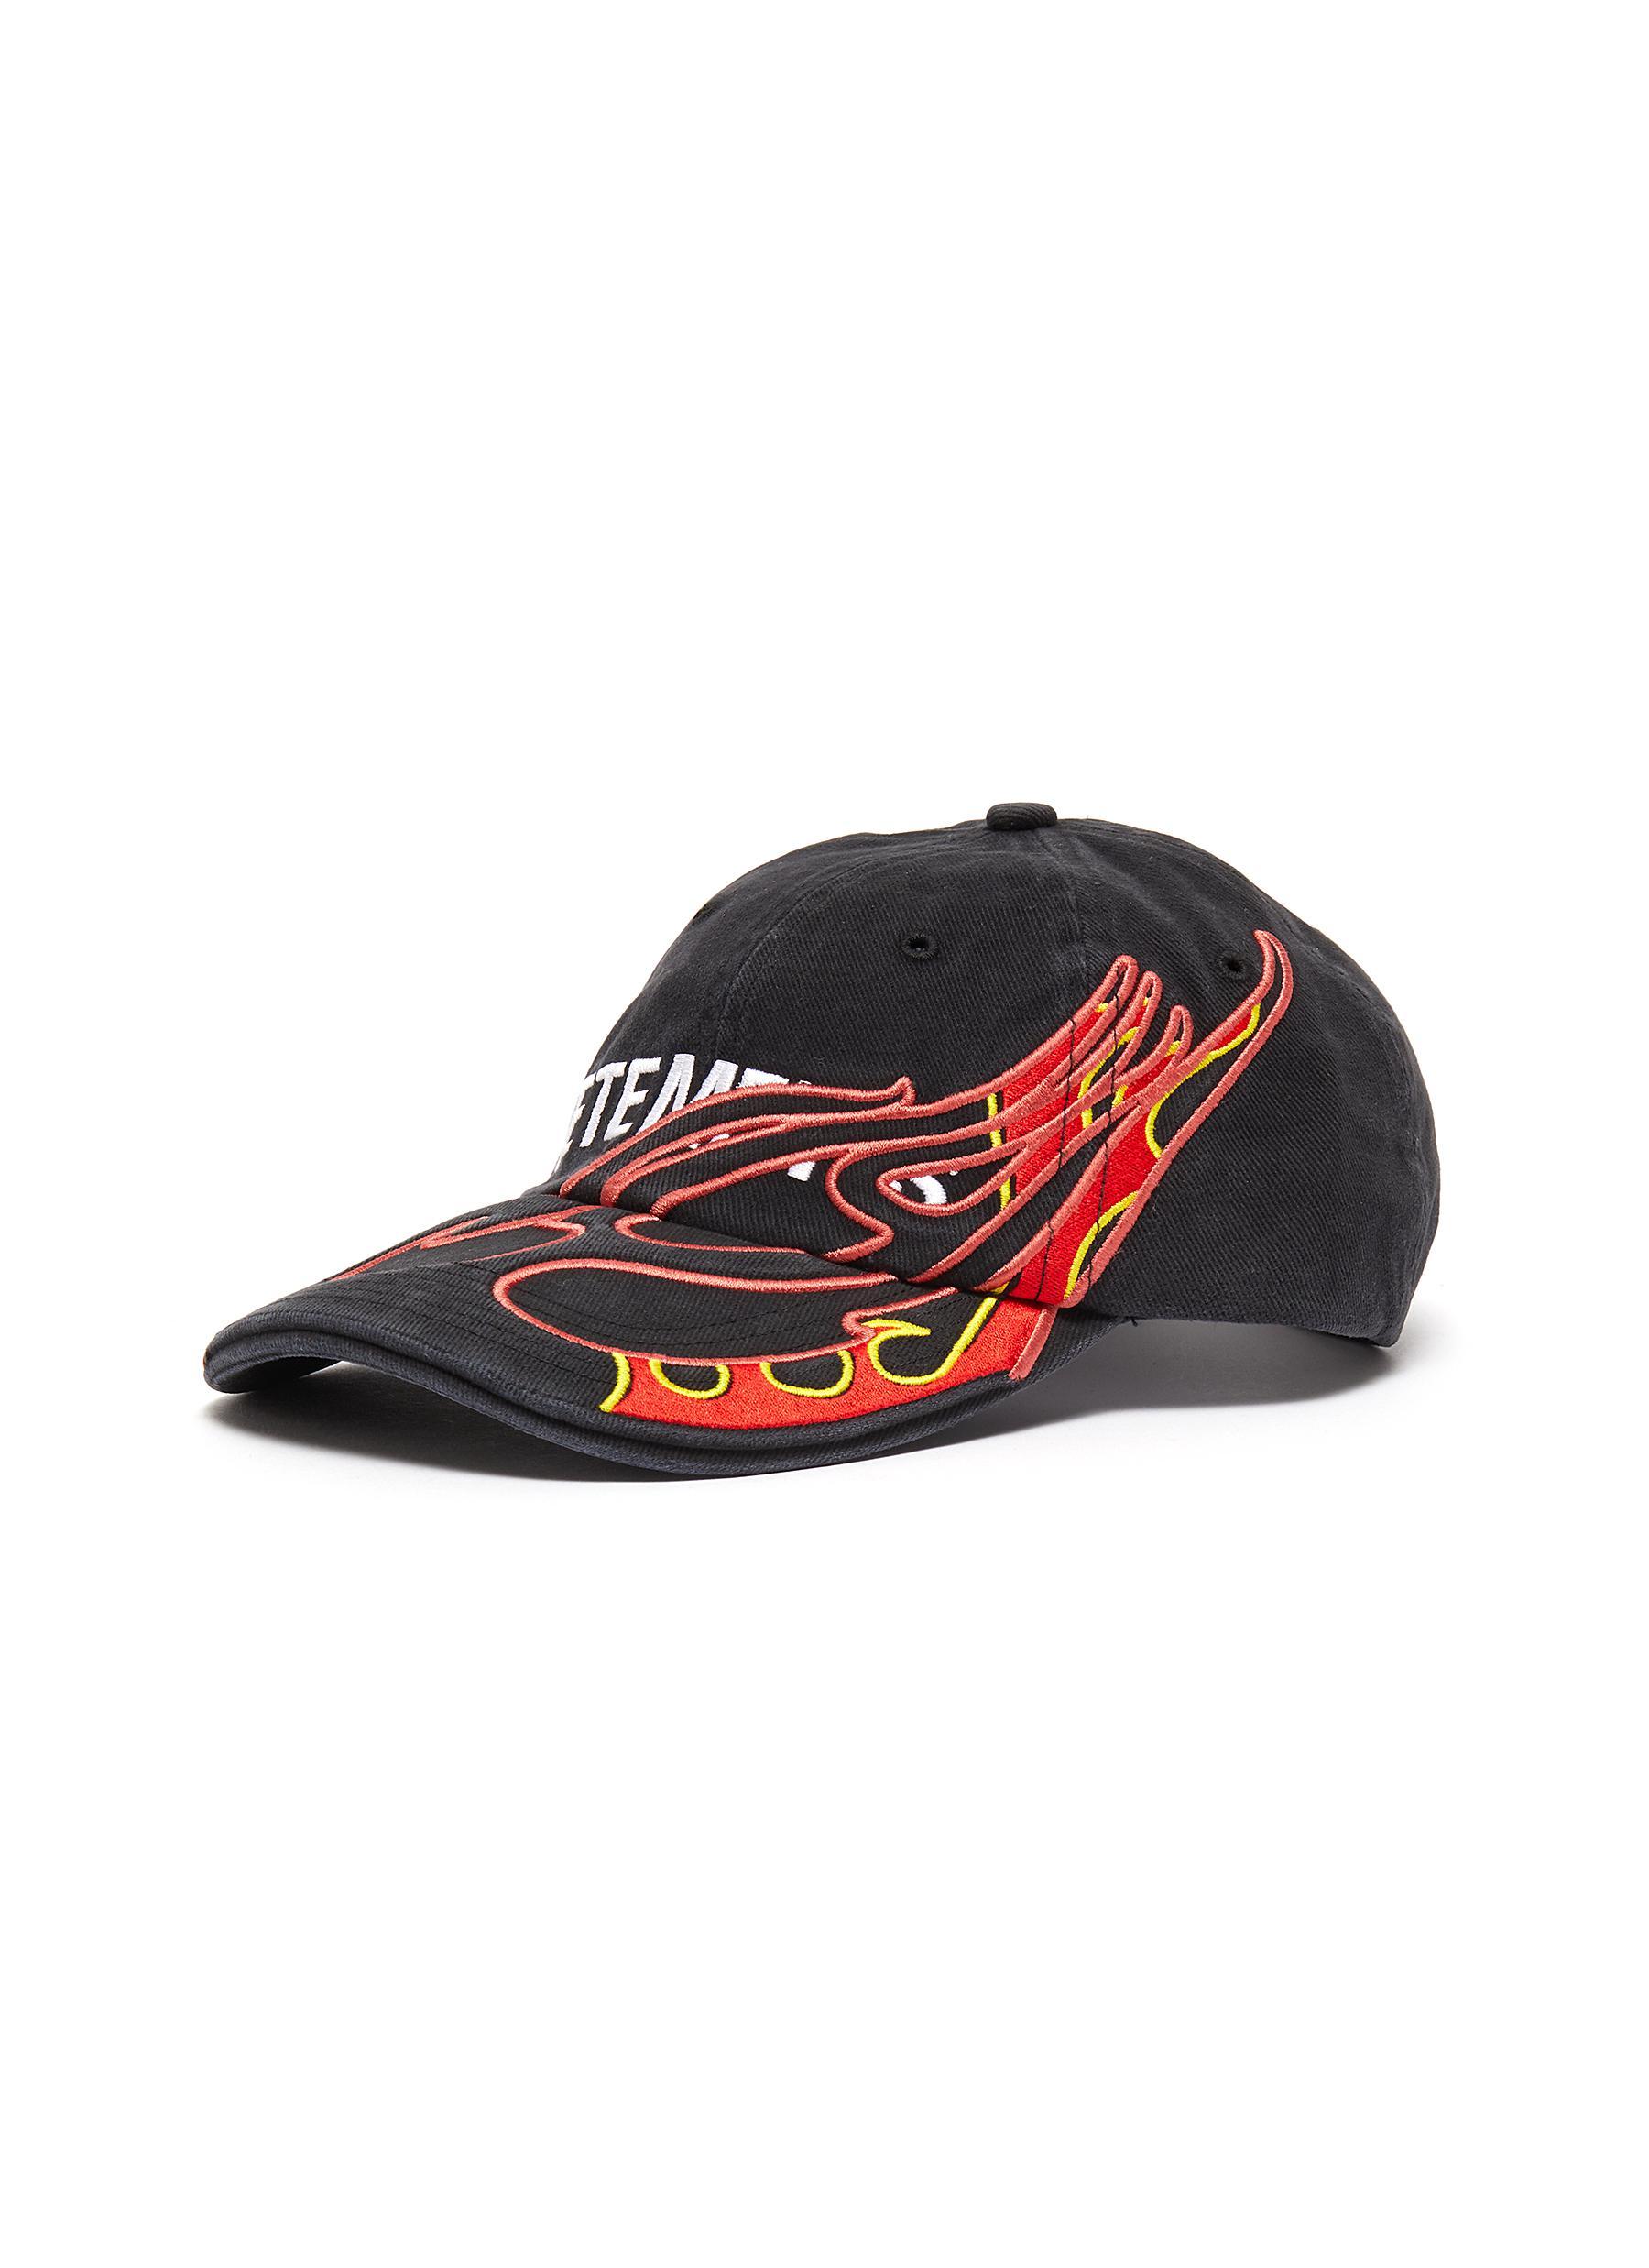 Vetements X Reebok 'fire' Graphic Logo Embroidered Baseball Cap for Men |  Lyst